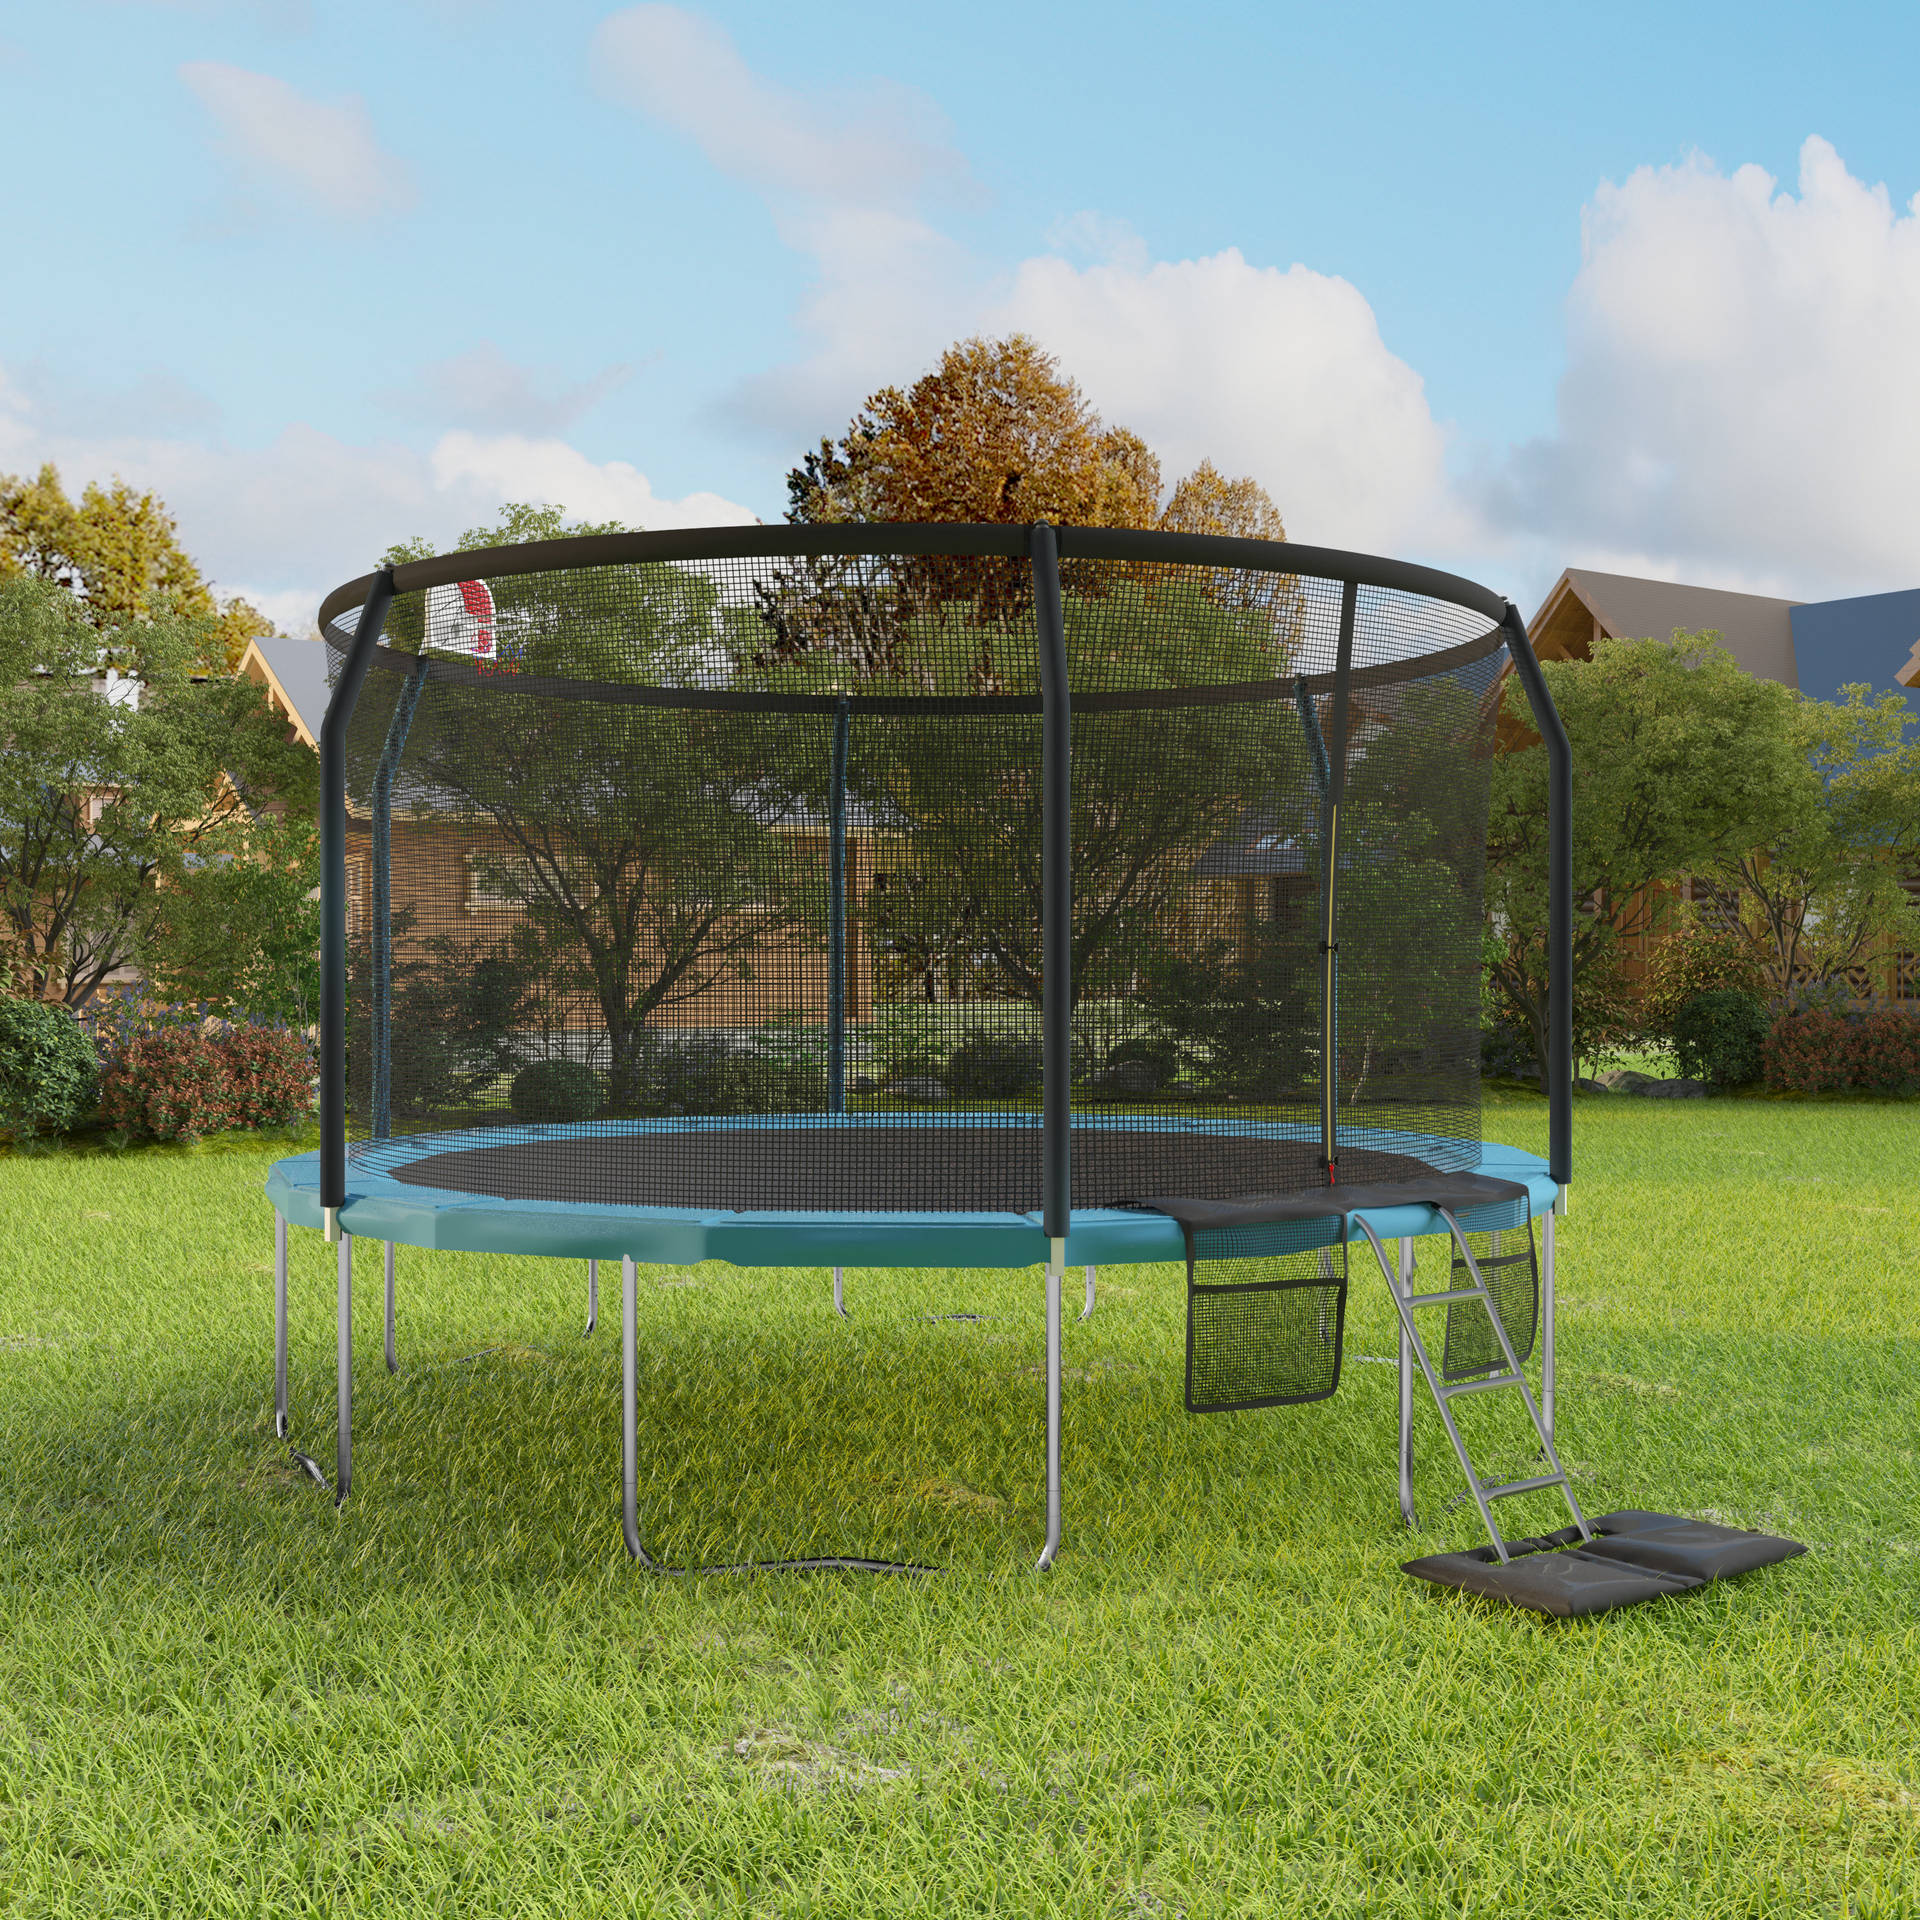 Trampoline Pictures Wallpaper